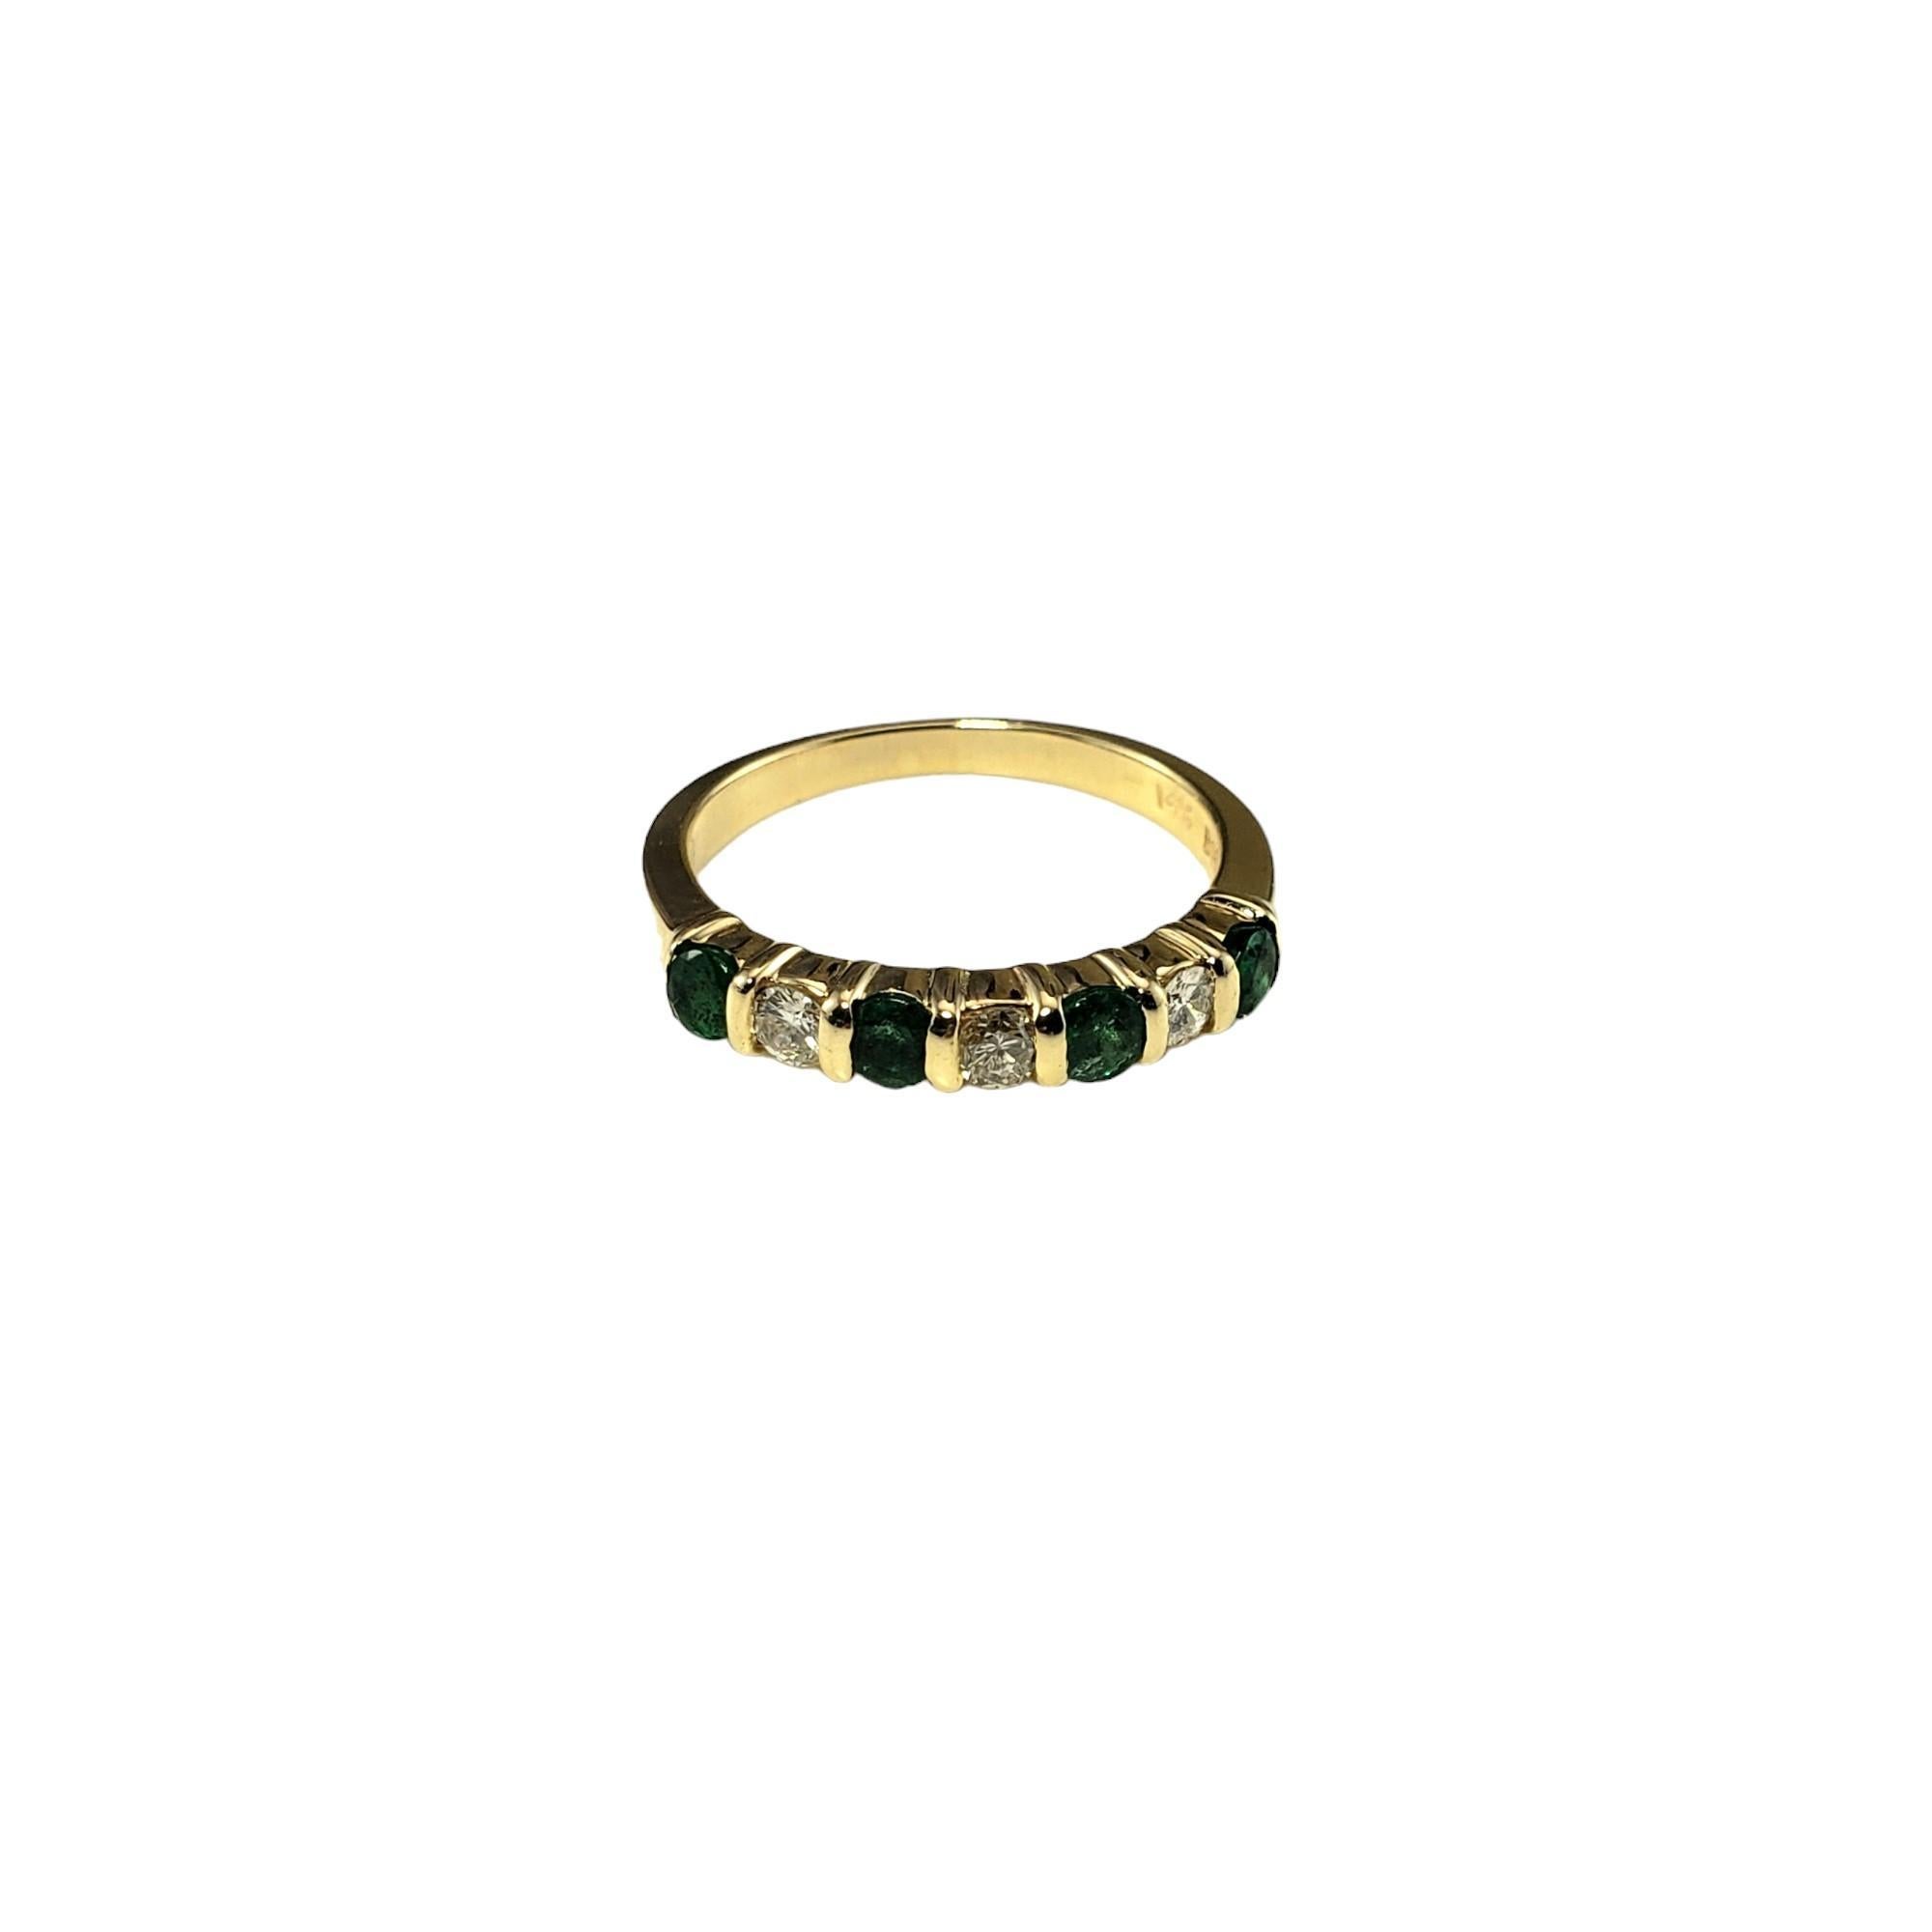 Vintage 14K Yellow Gold Emerald and Diamond Ring Size 5

This elegant band features three round brilliant cut diamonds and four round emeralds set in classic 14K yellow gold.  Width: 3 mm.

Total emerald weight: .28 ct.

Total diamond weight: .15